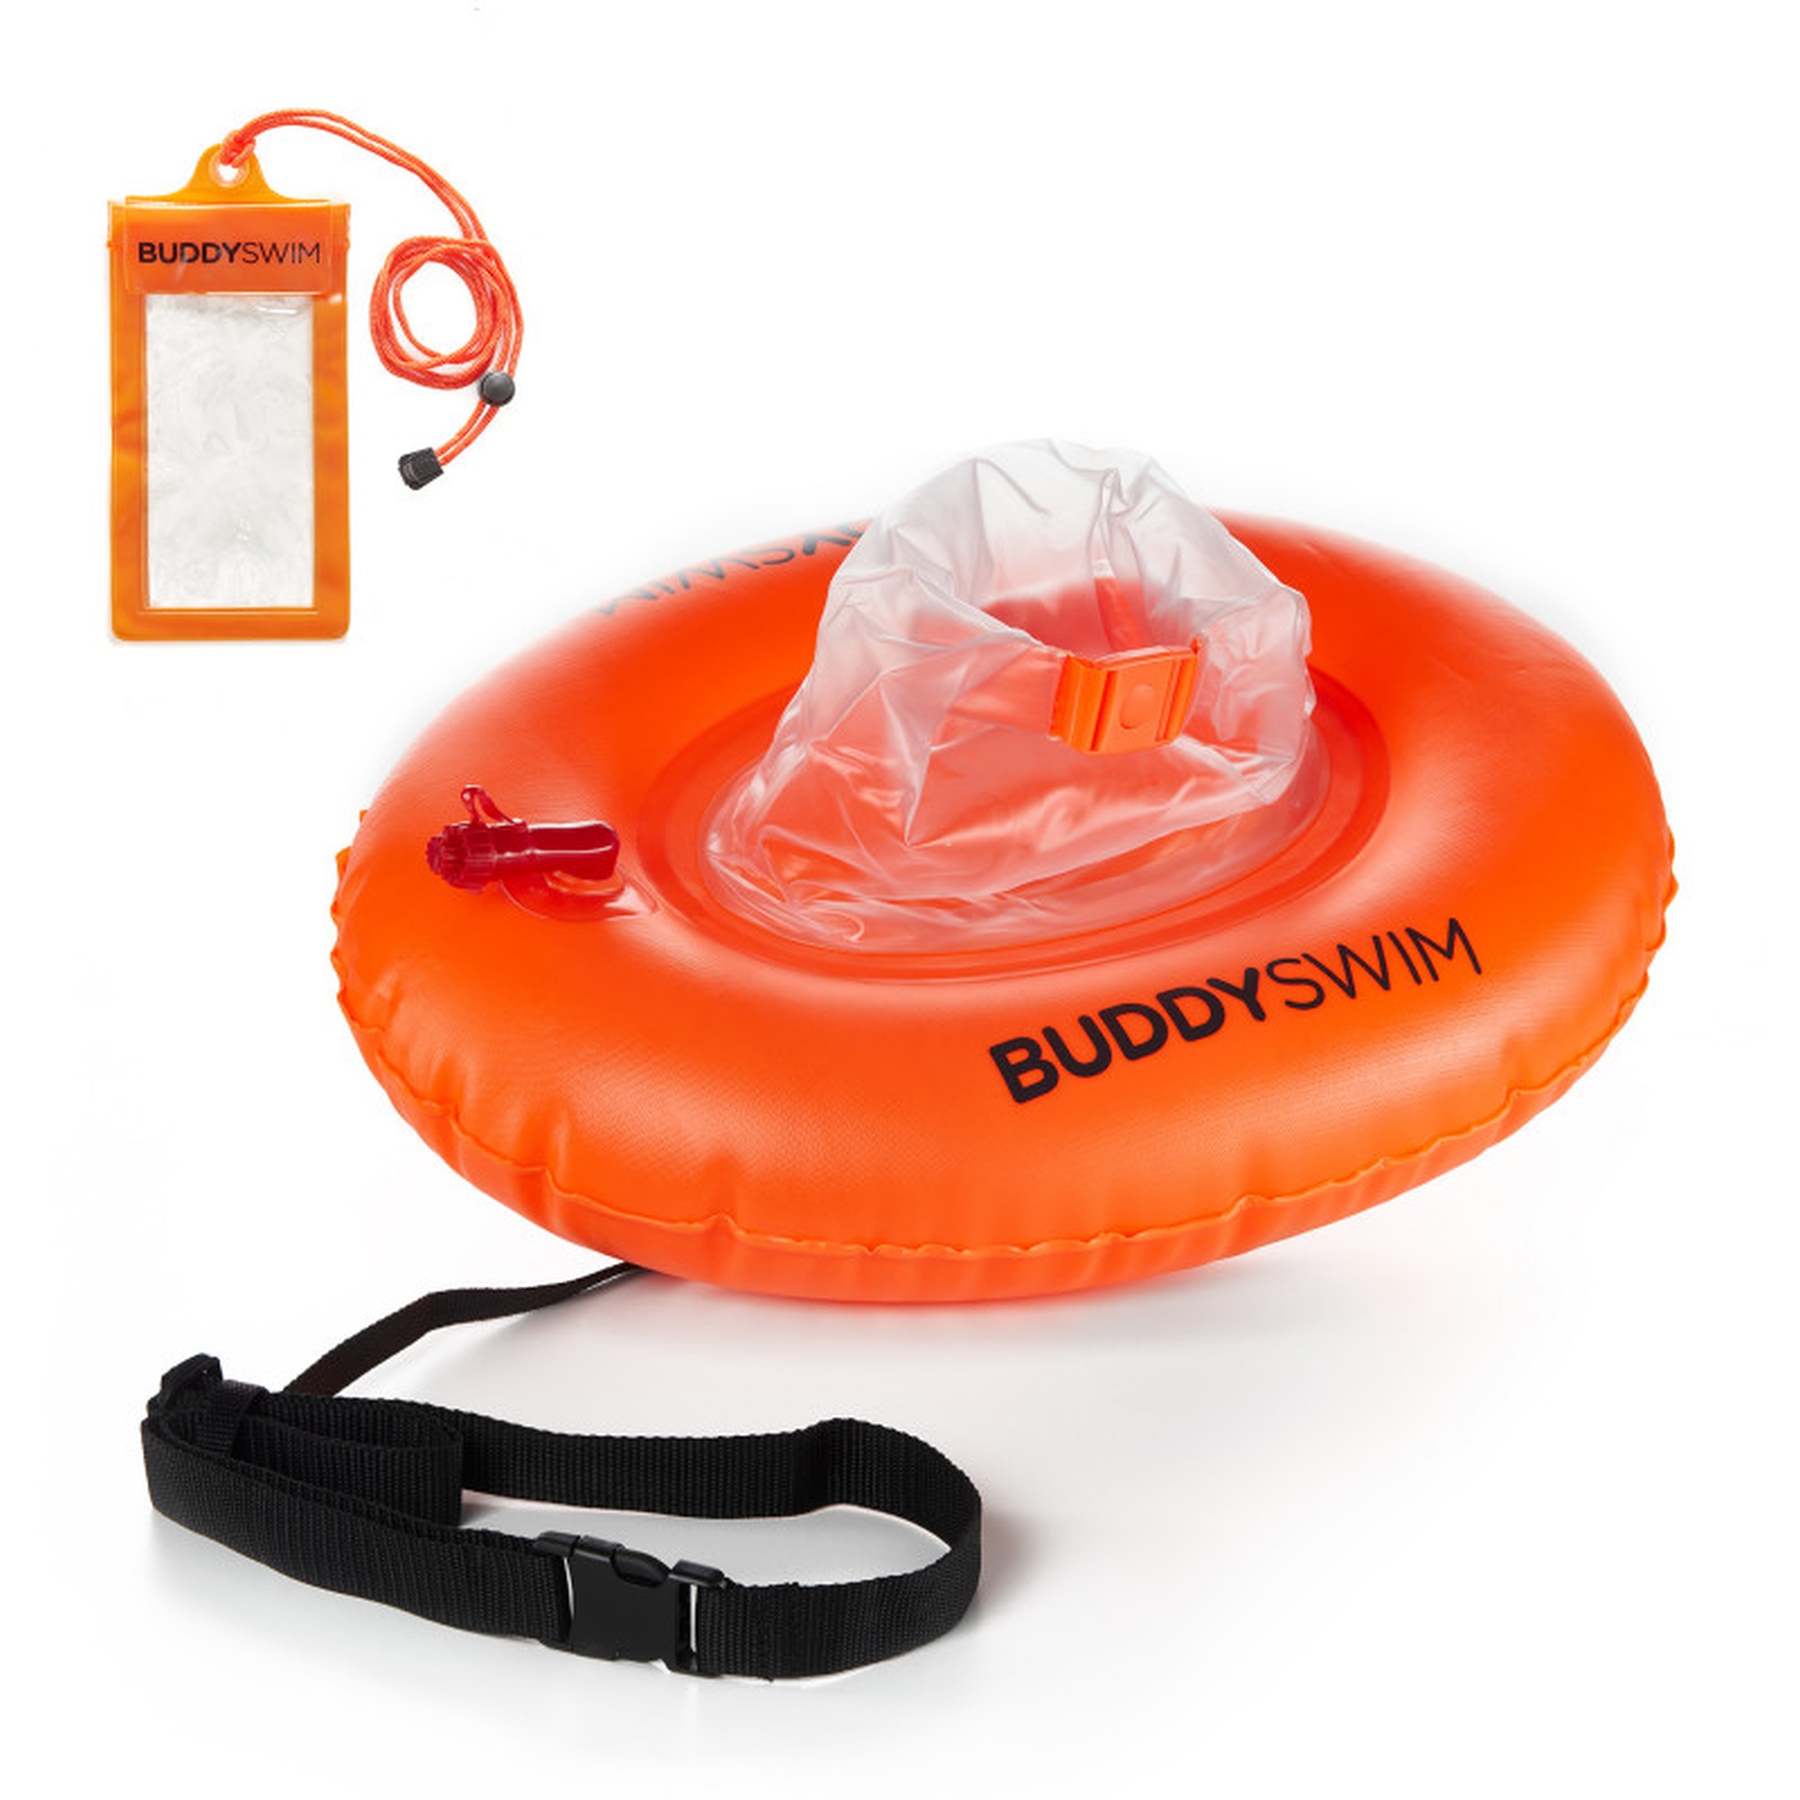 Picture of Buddyswim Hydrastation Buoy - with waterproof Phone Bag